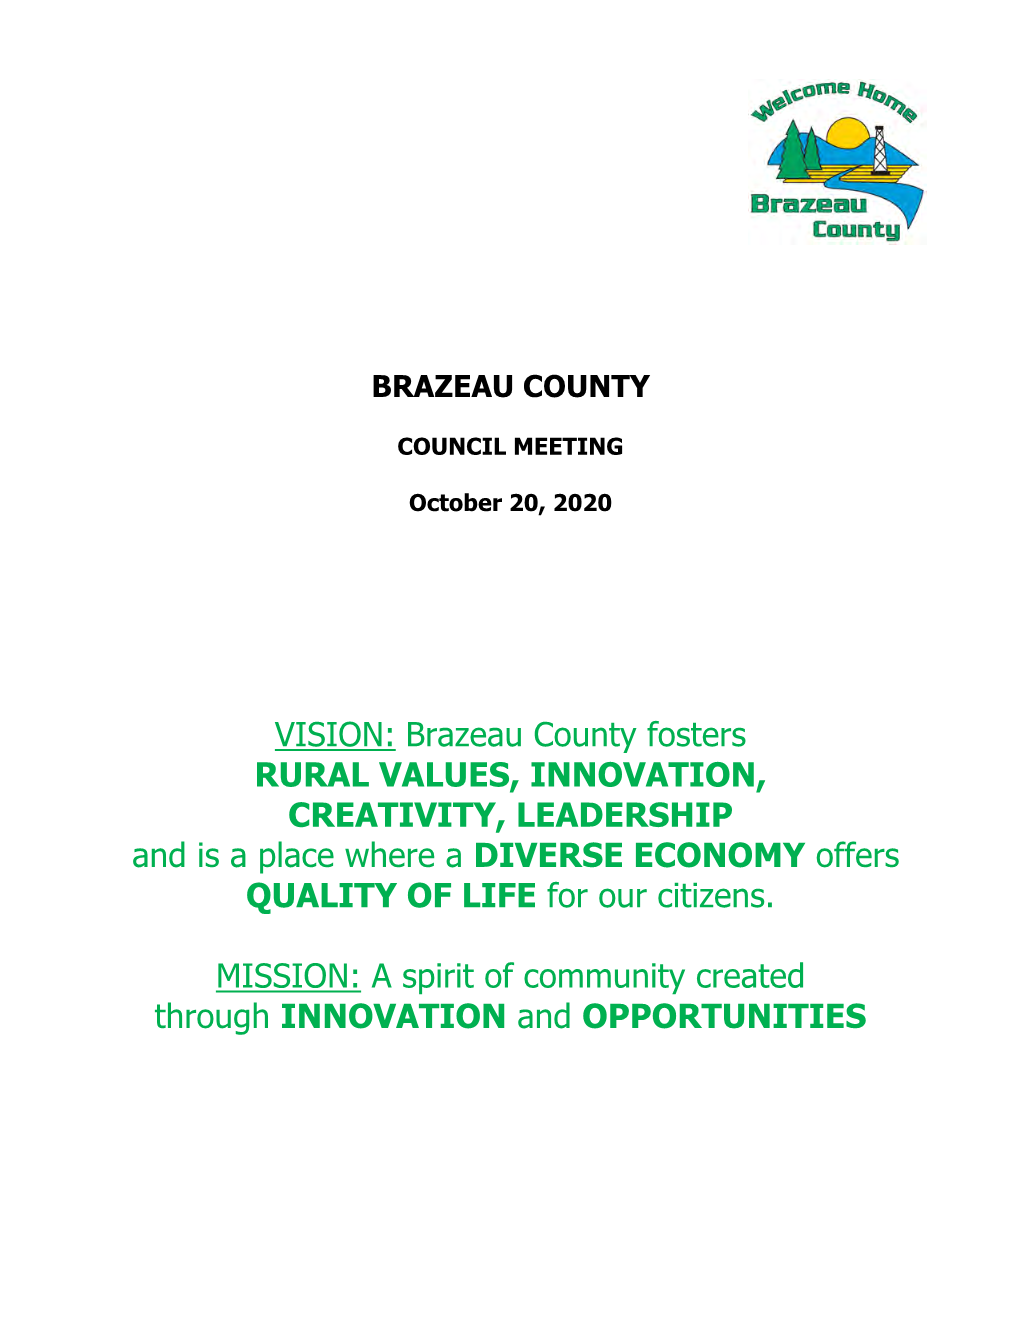 VISION: Brazeau County Fosters RURAL VALUES, INNOVATION, CREATIVITY, LEADERSHIP and Is a Place Where a DIVERSE ECONOMY Offers QUALITY of LIFE for Our Citizens